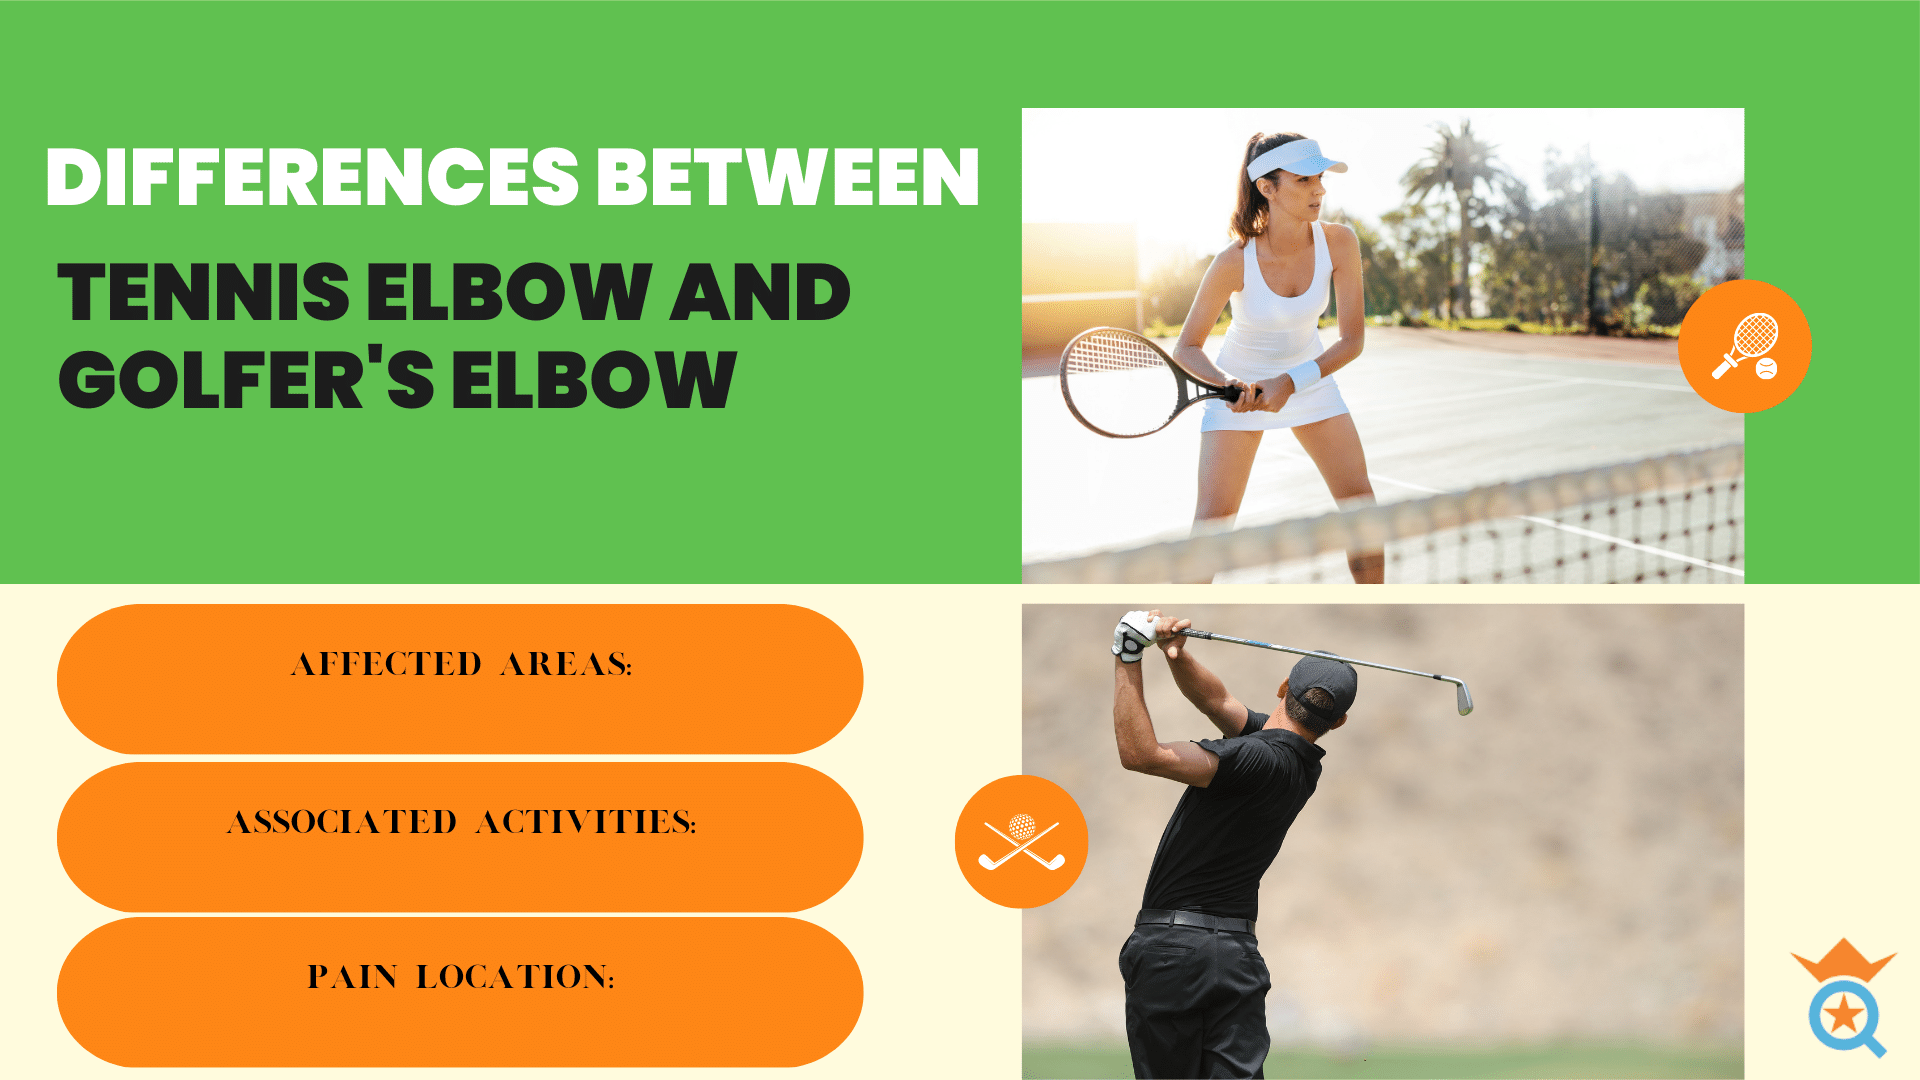 Differences Between Tennis Elbow and Golfer's Elbow